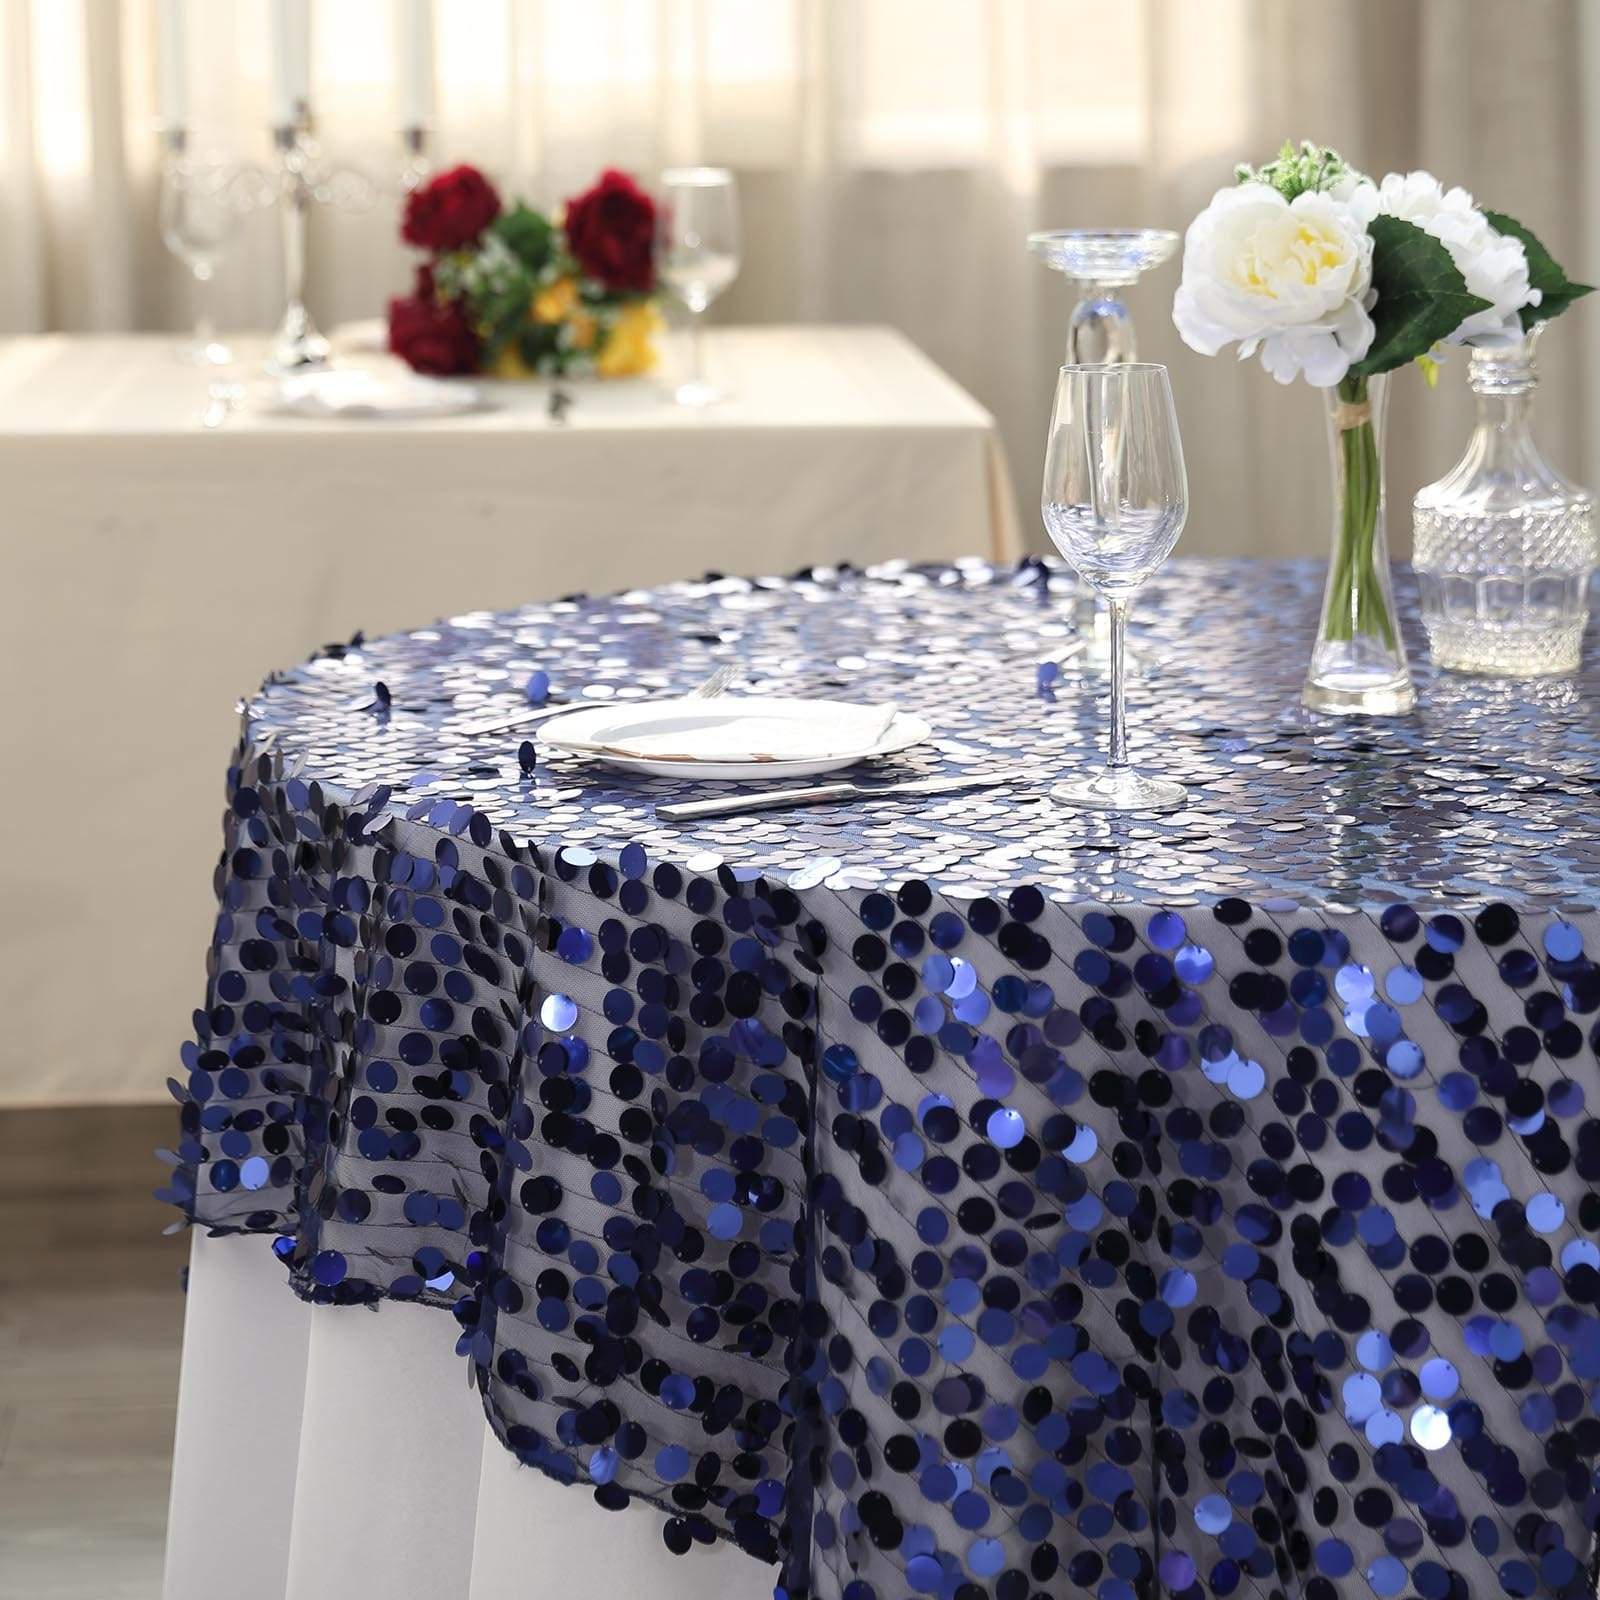 72 inch Navy Blue Big Payette Sequin Square Table Overlay